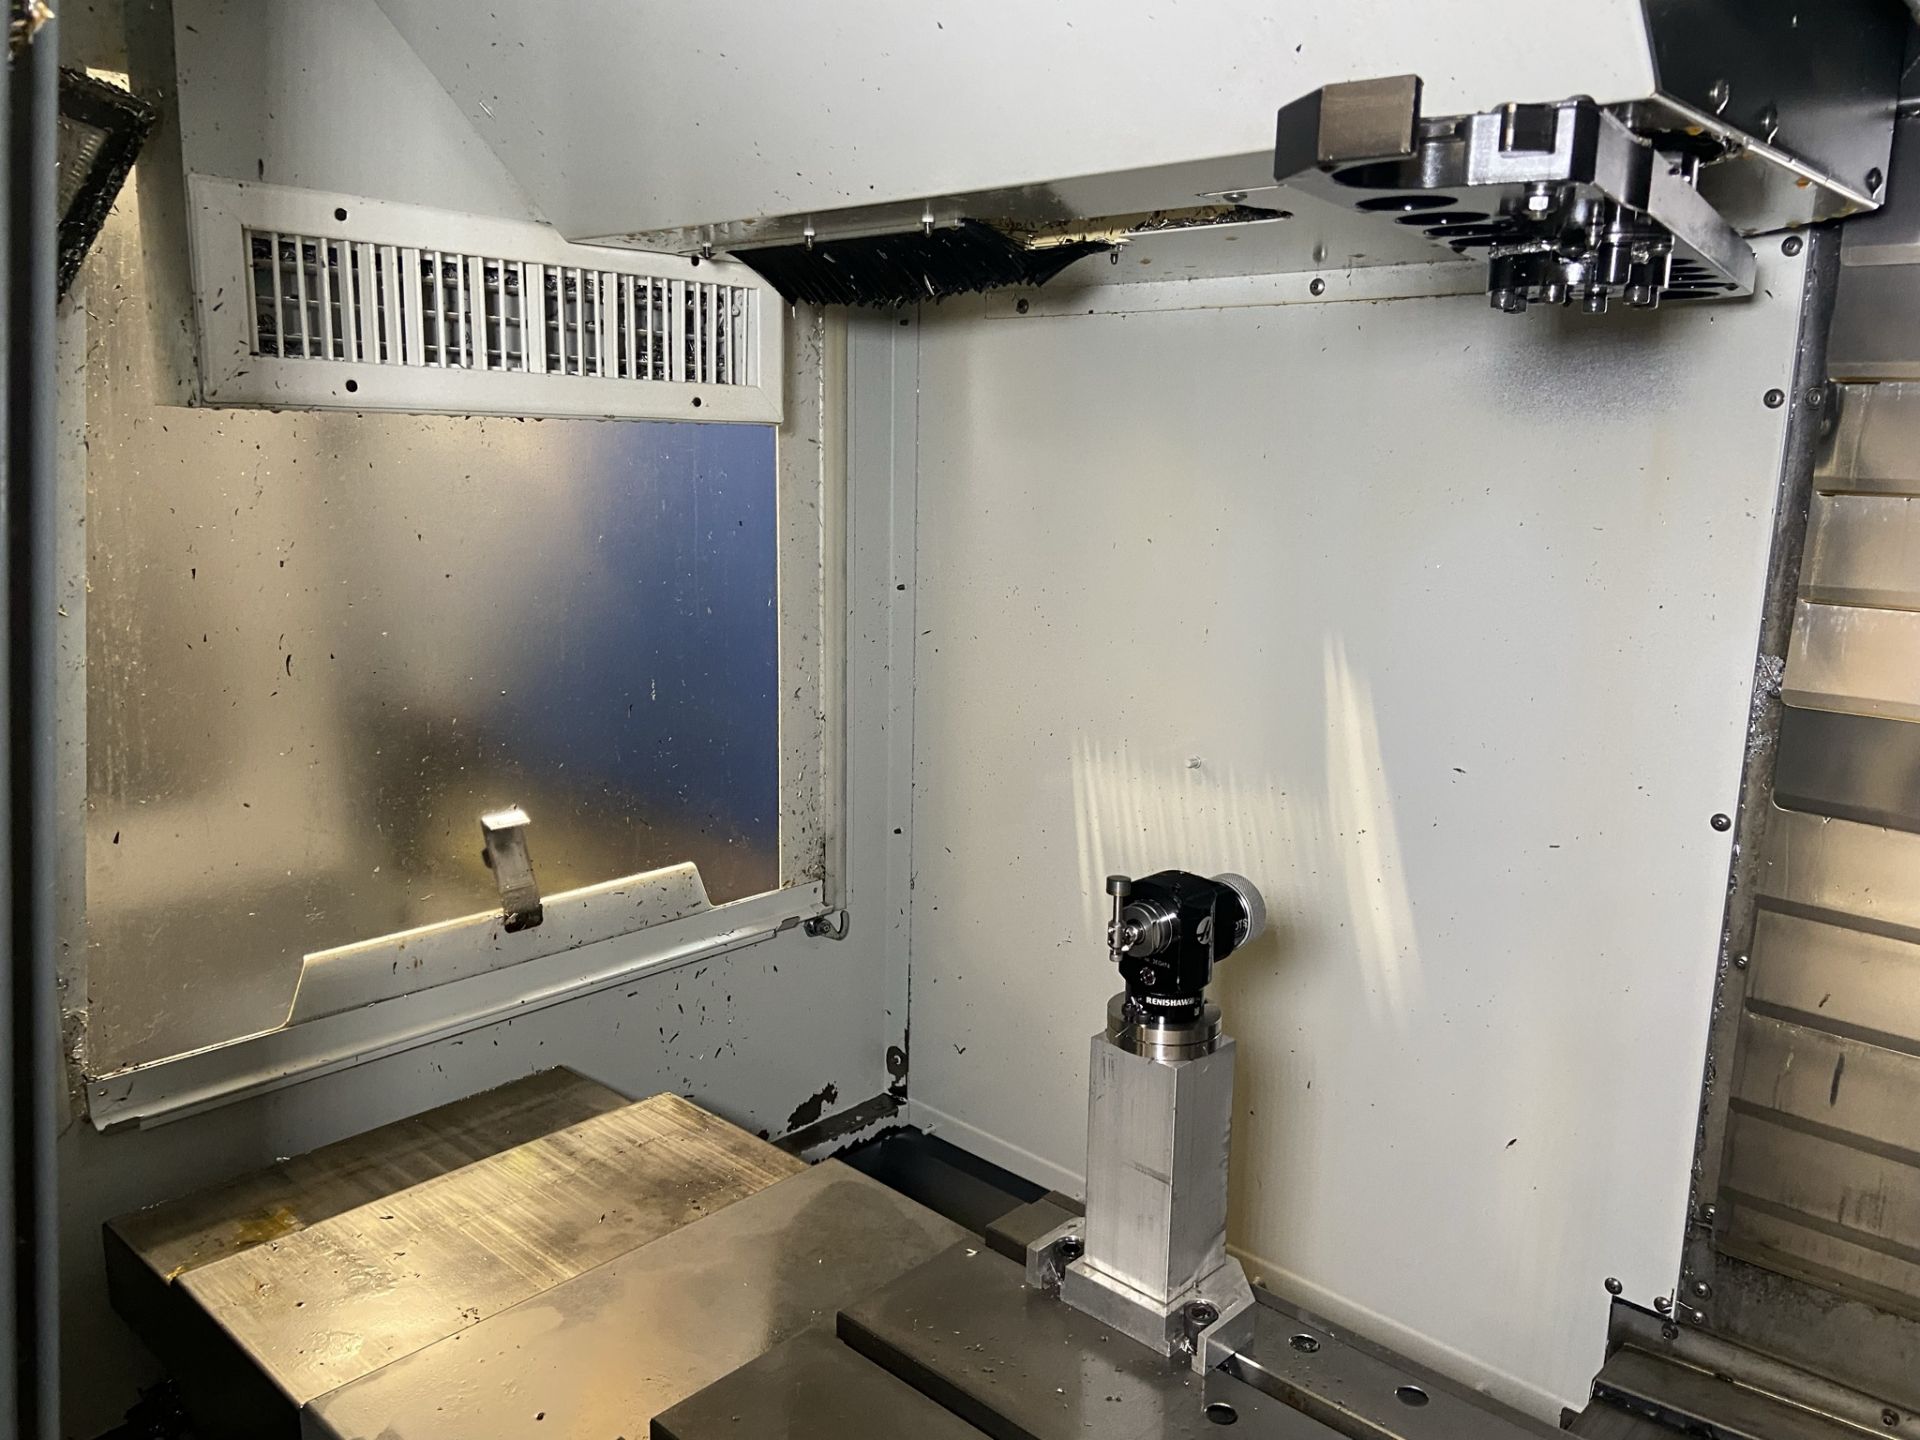 2020 HAAS VF-2SS 4-Axis CNC Vertical Machining Center - Image 5 of 12